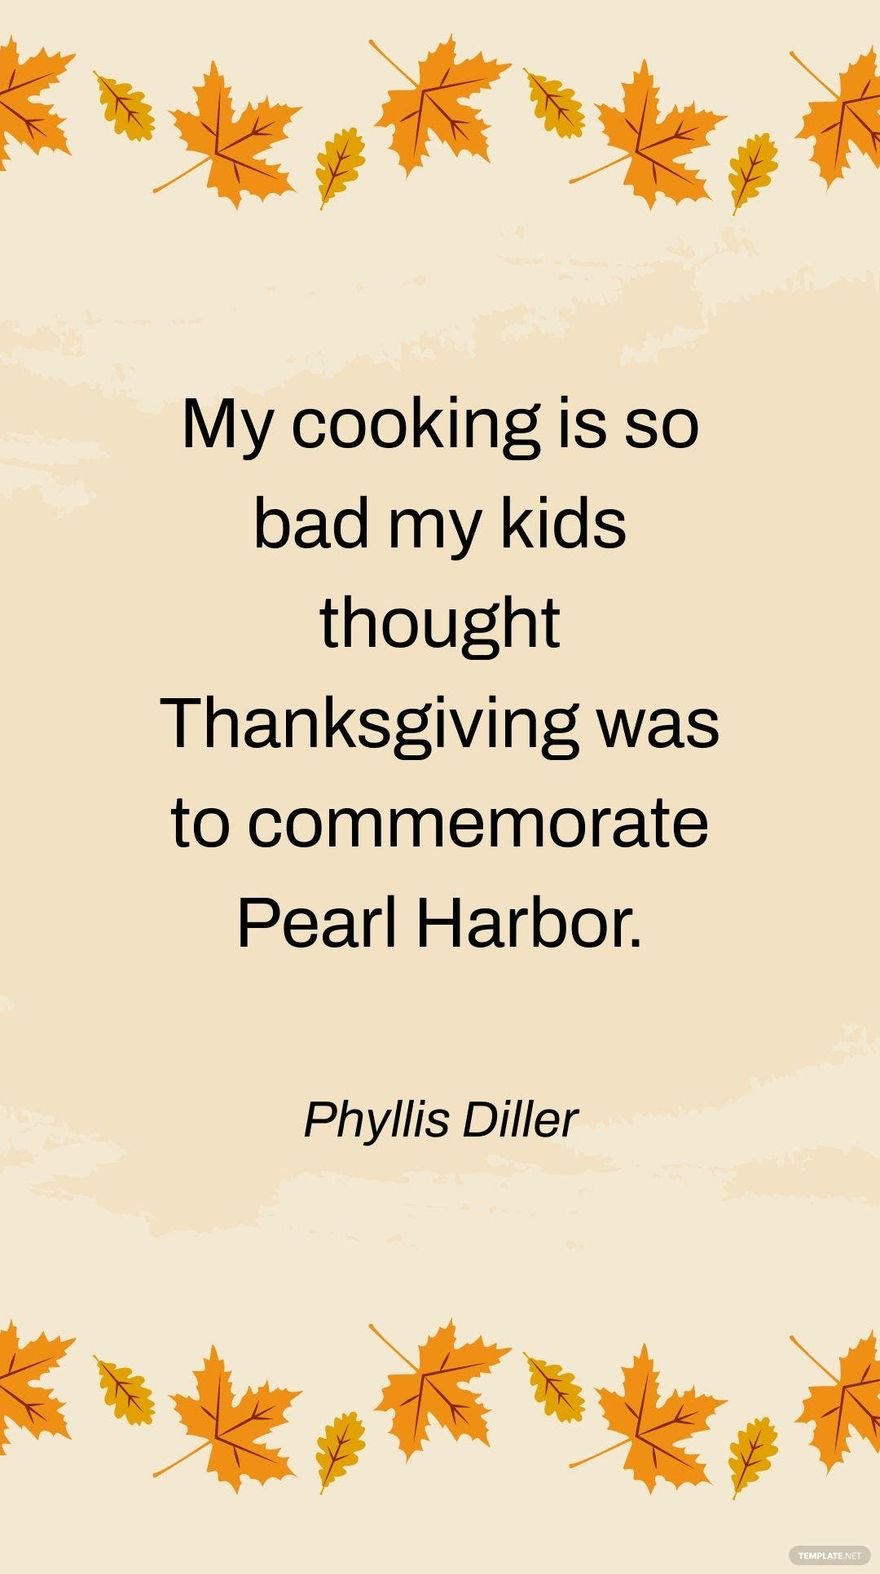 Free Phyllis Diller - My cooking is so bad my kids thought Thanksgiving was to commemorate Pearl Harbor. in JPG